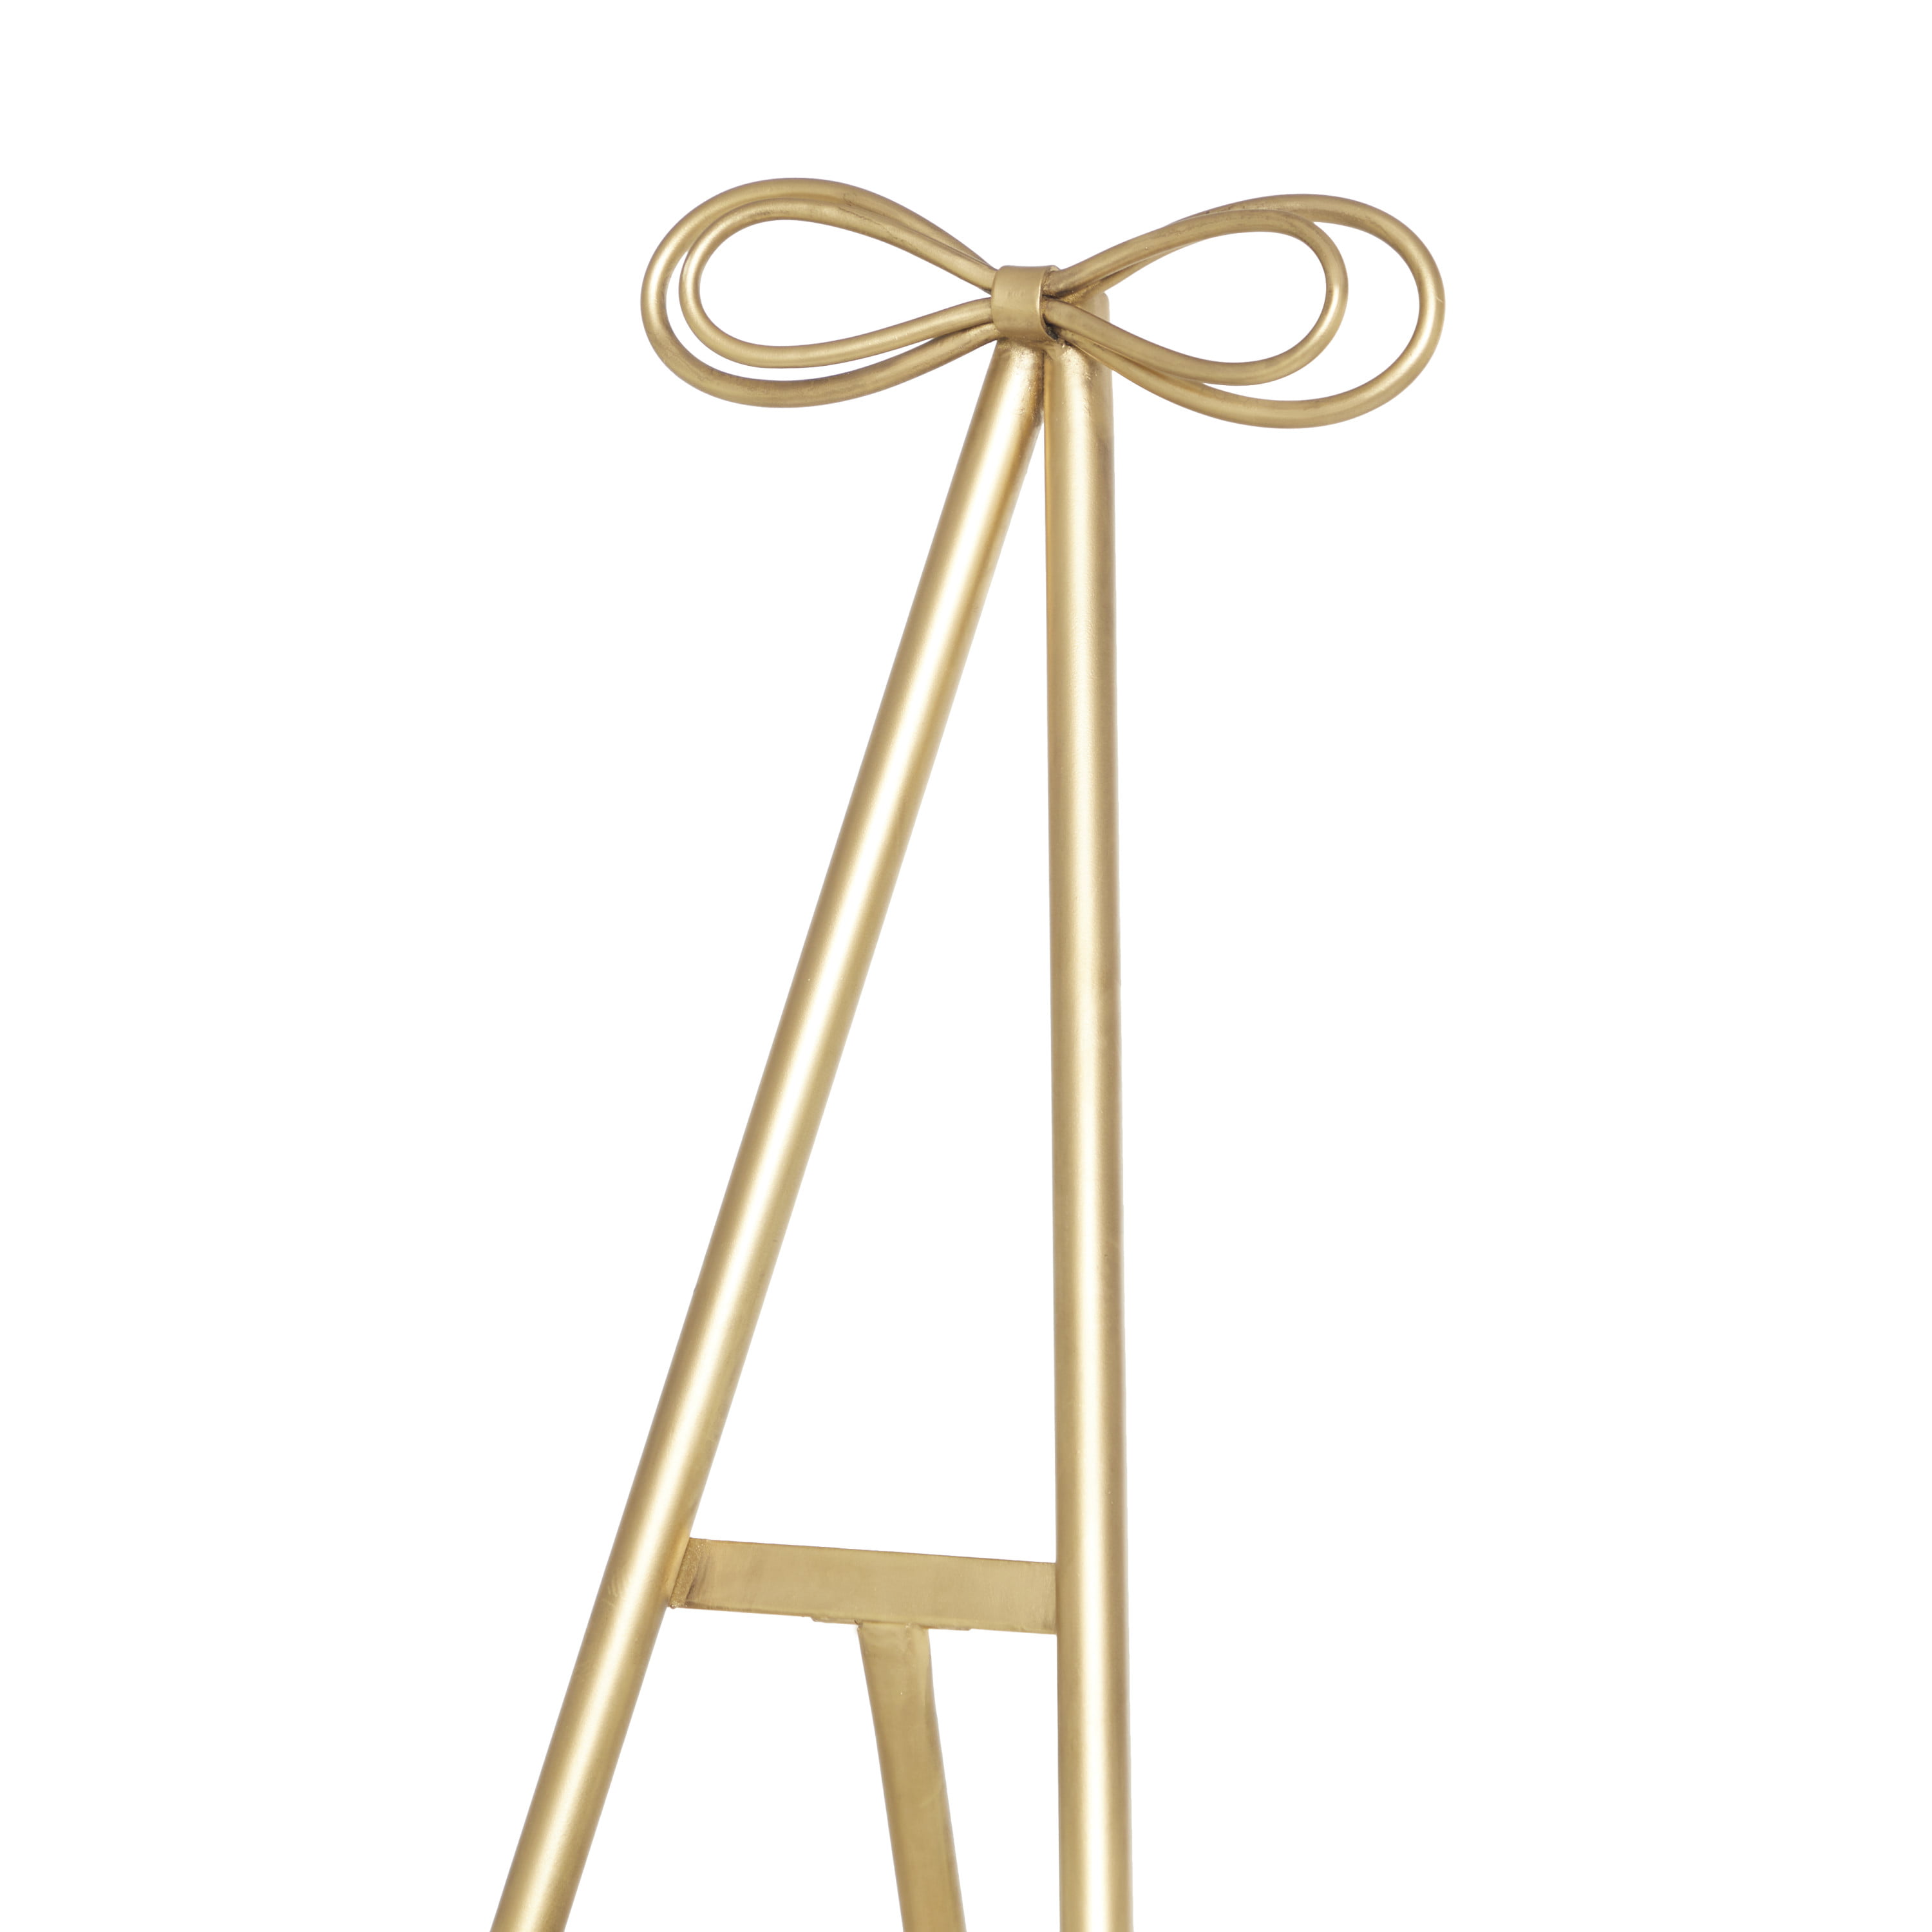  2Psc 46.5”H Gold Floor Easel Stand for Display with